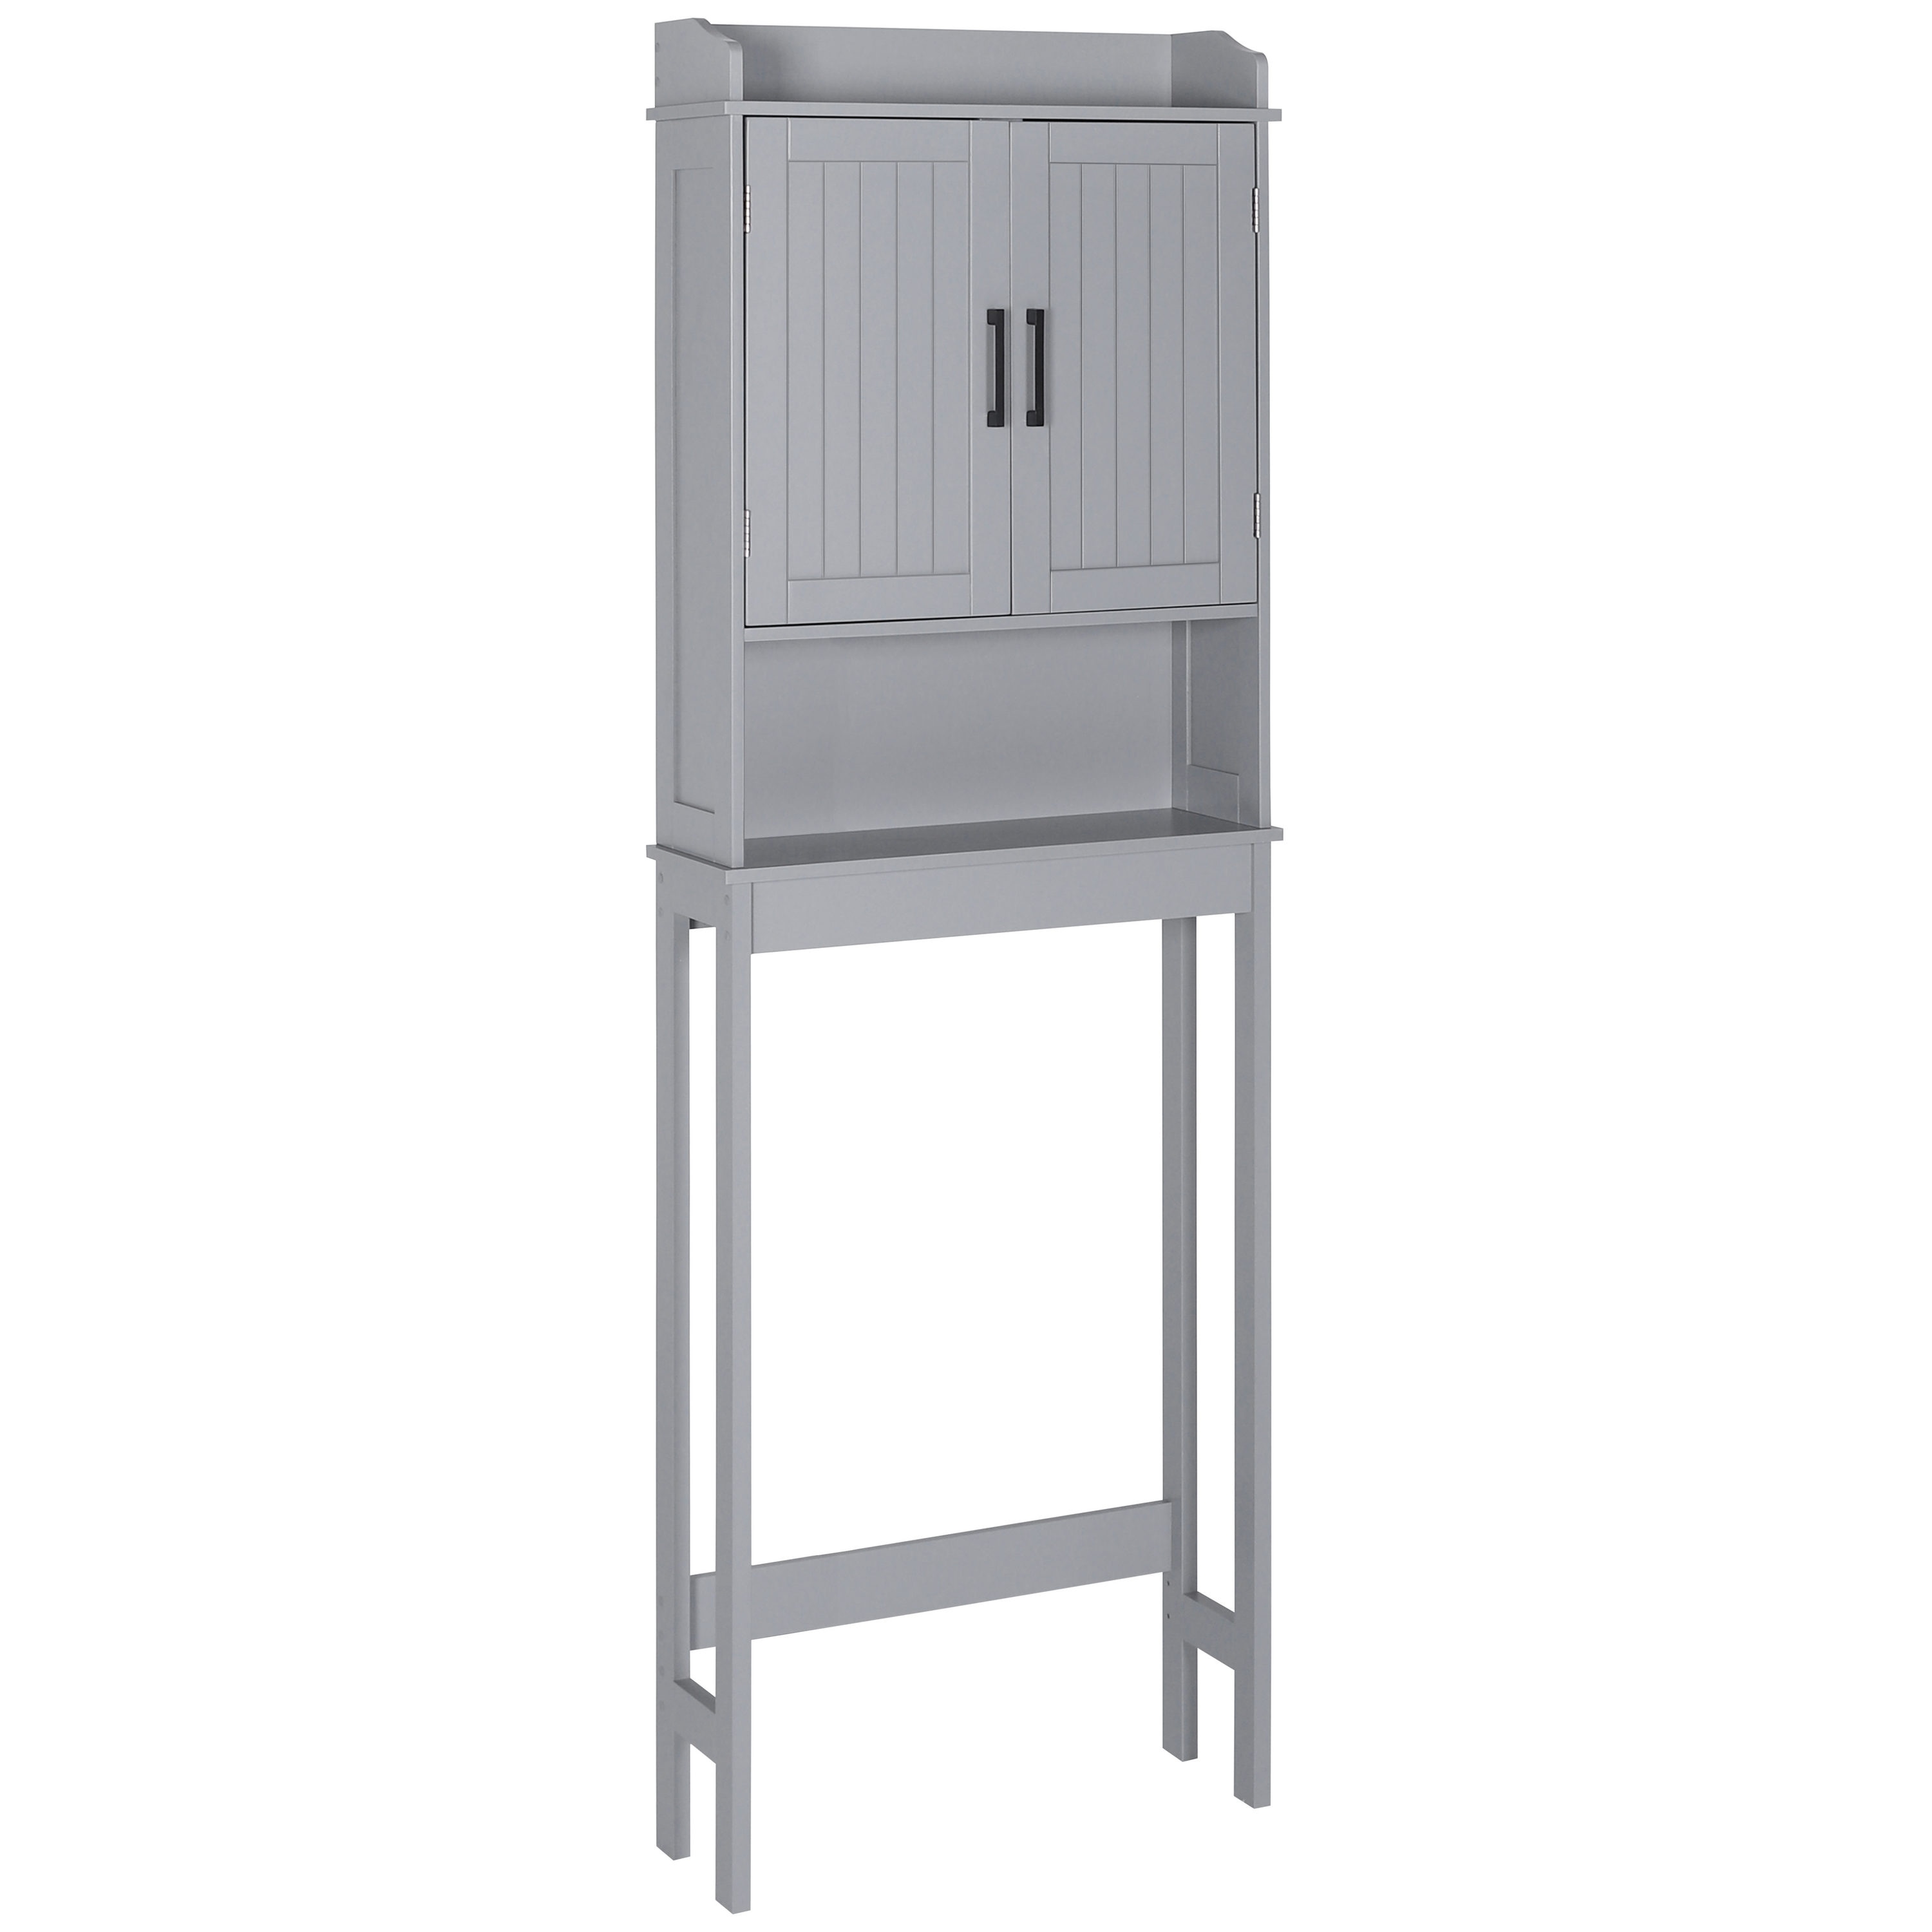 VASAGLE 3-Tier Over-the-Toilet Rack, White